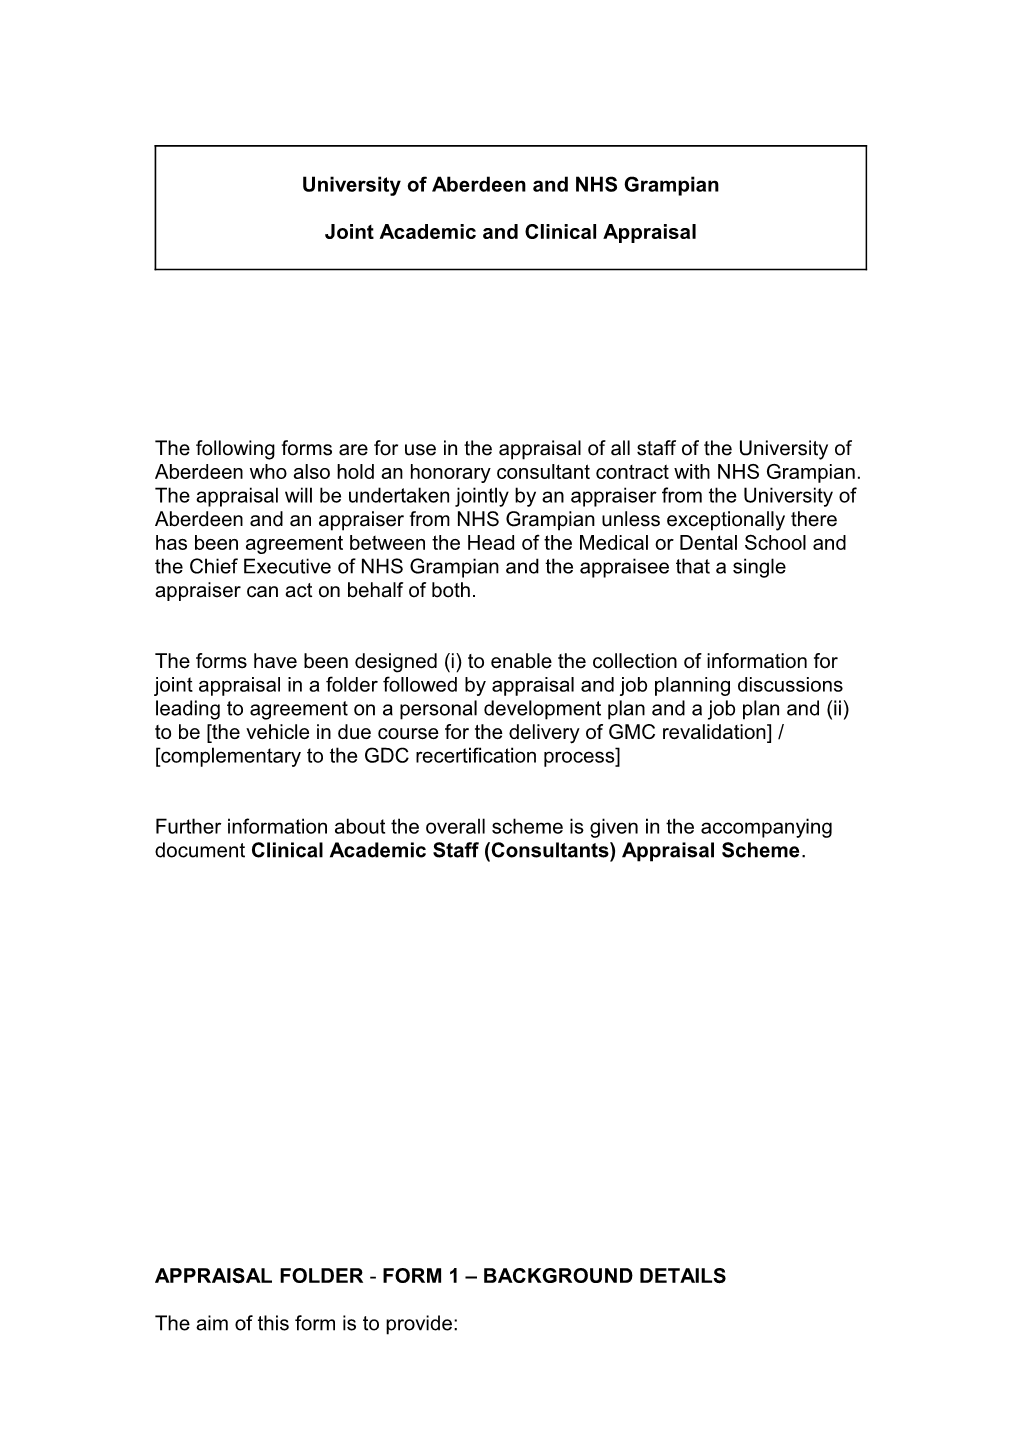 Joint Academic & Clinical Appraisal Forms & Annex